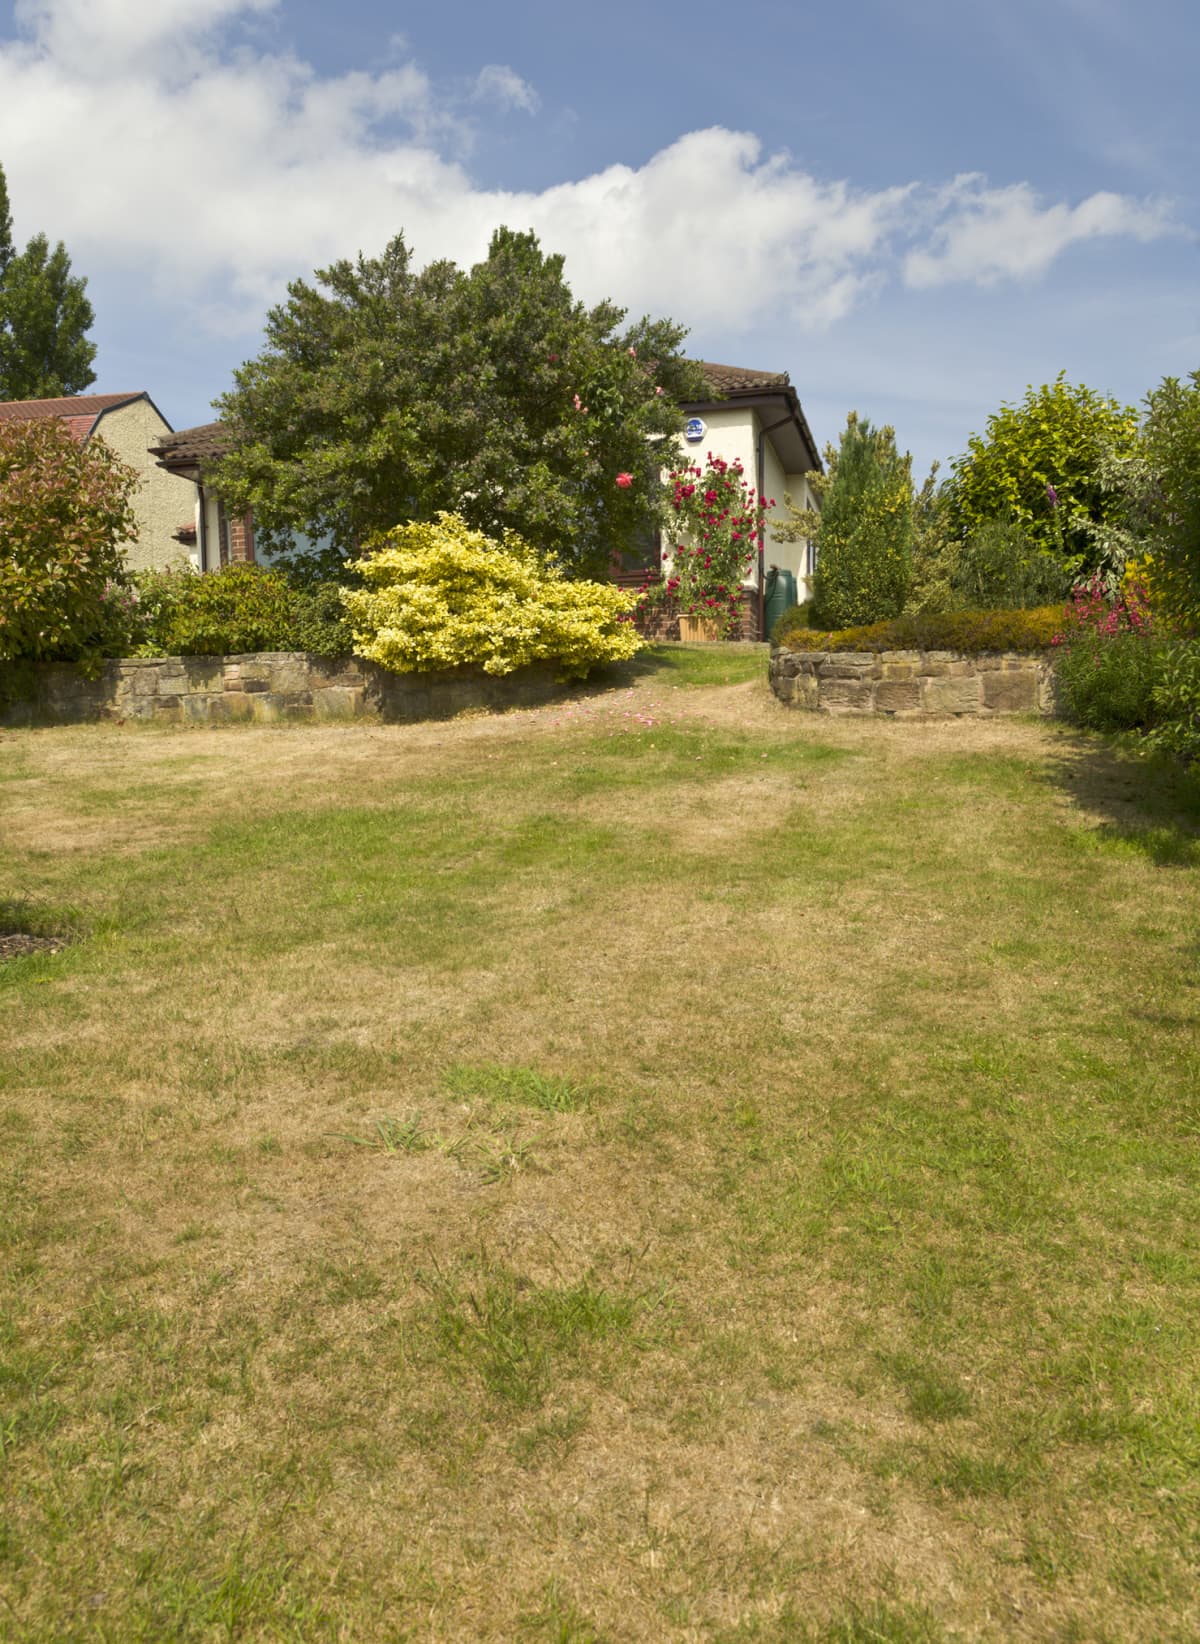 A dry lawn in front of a house